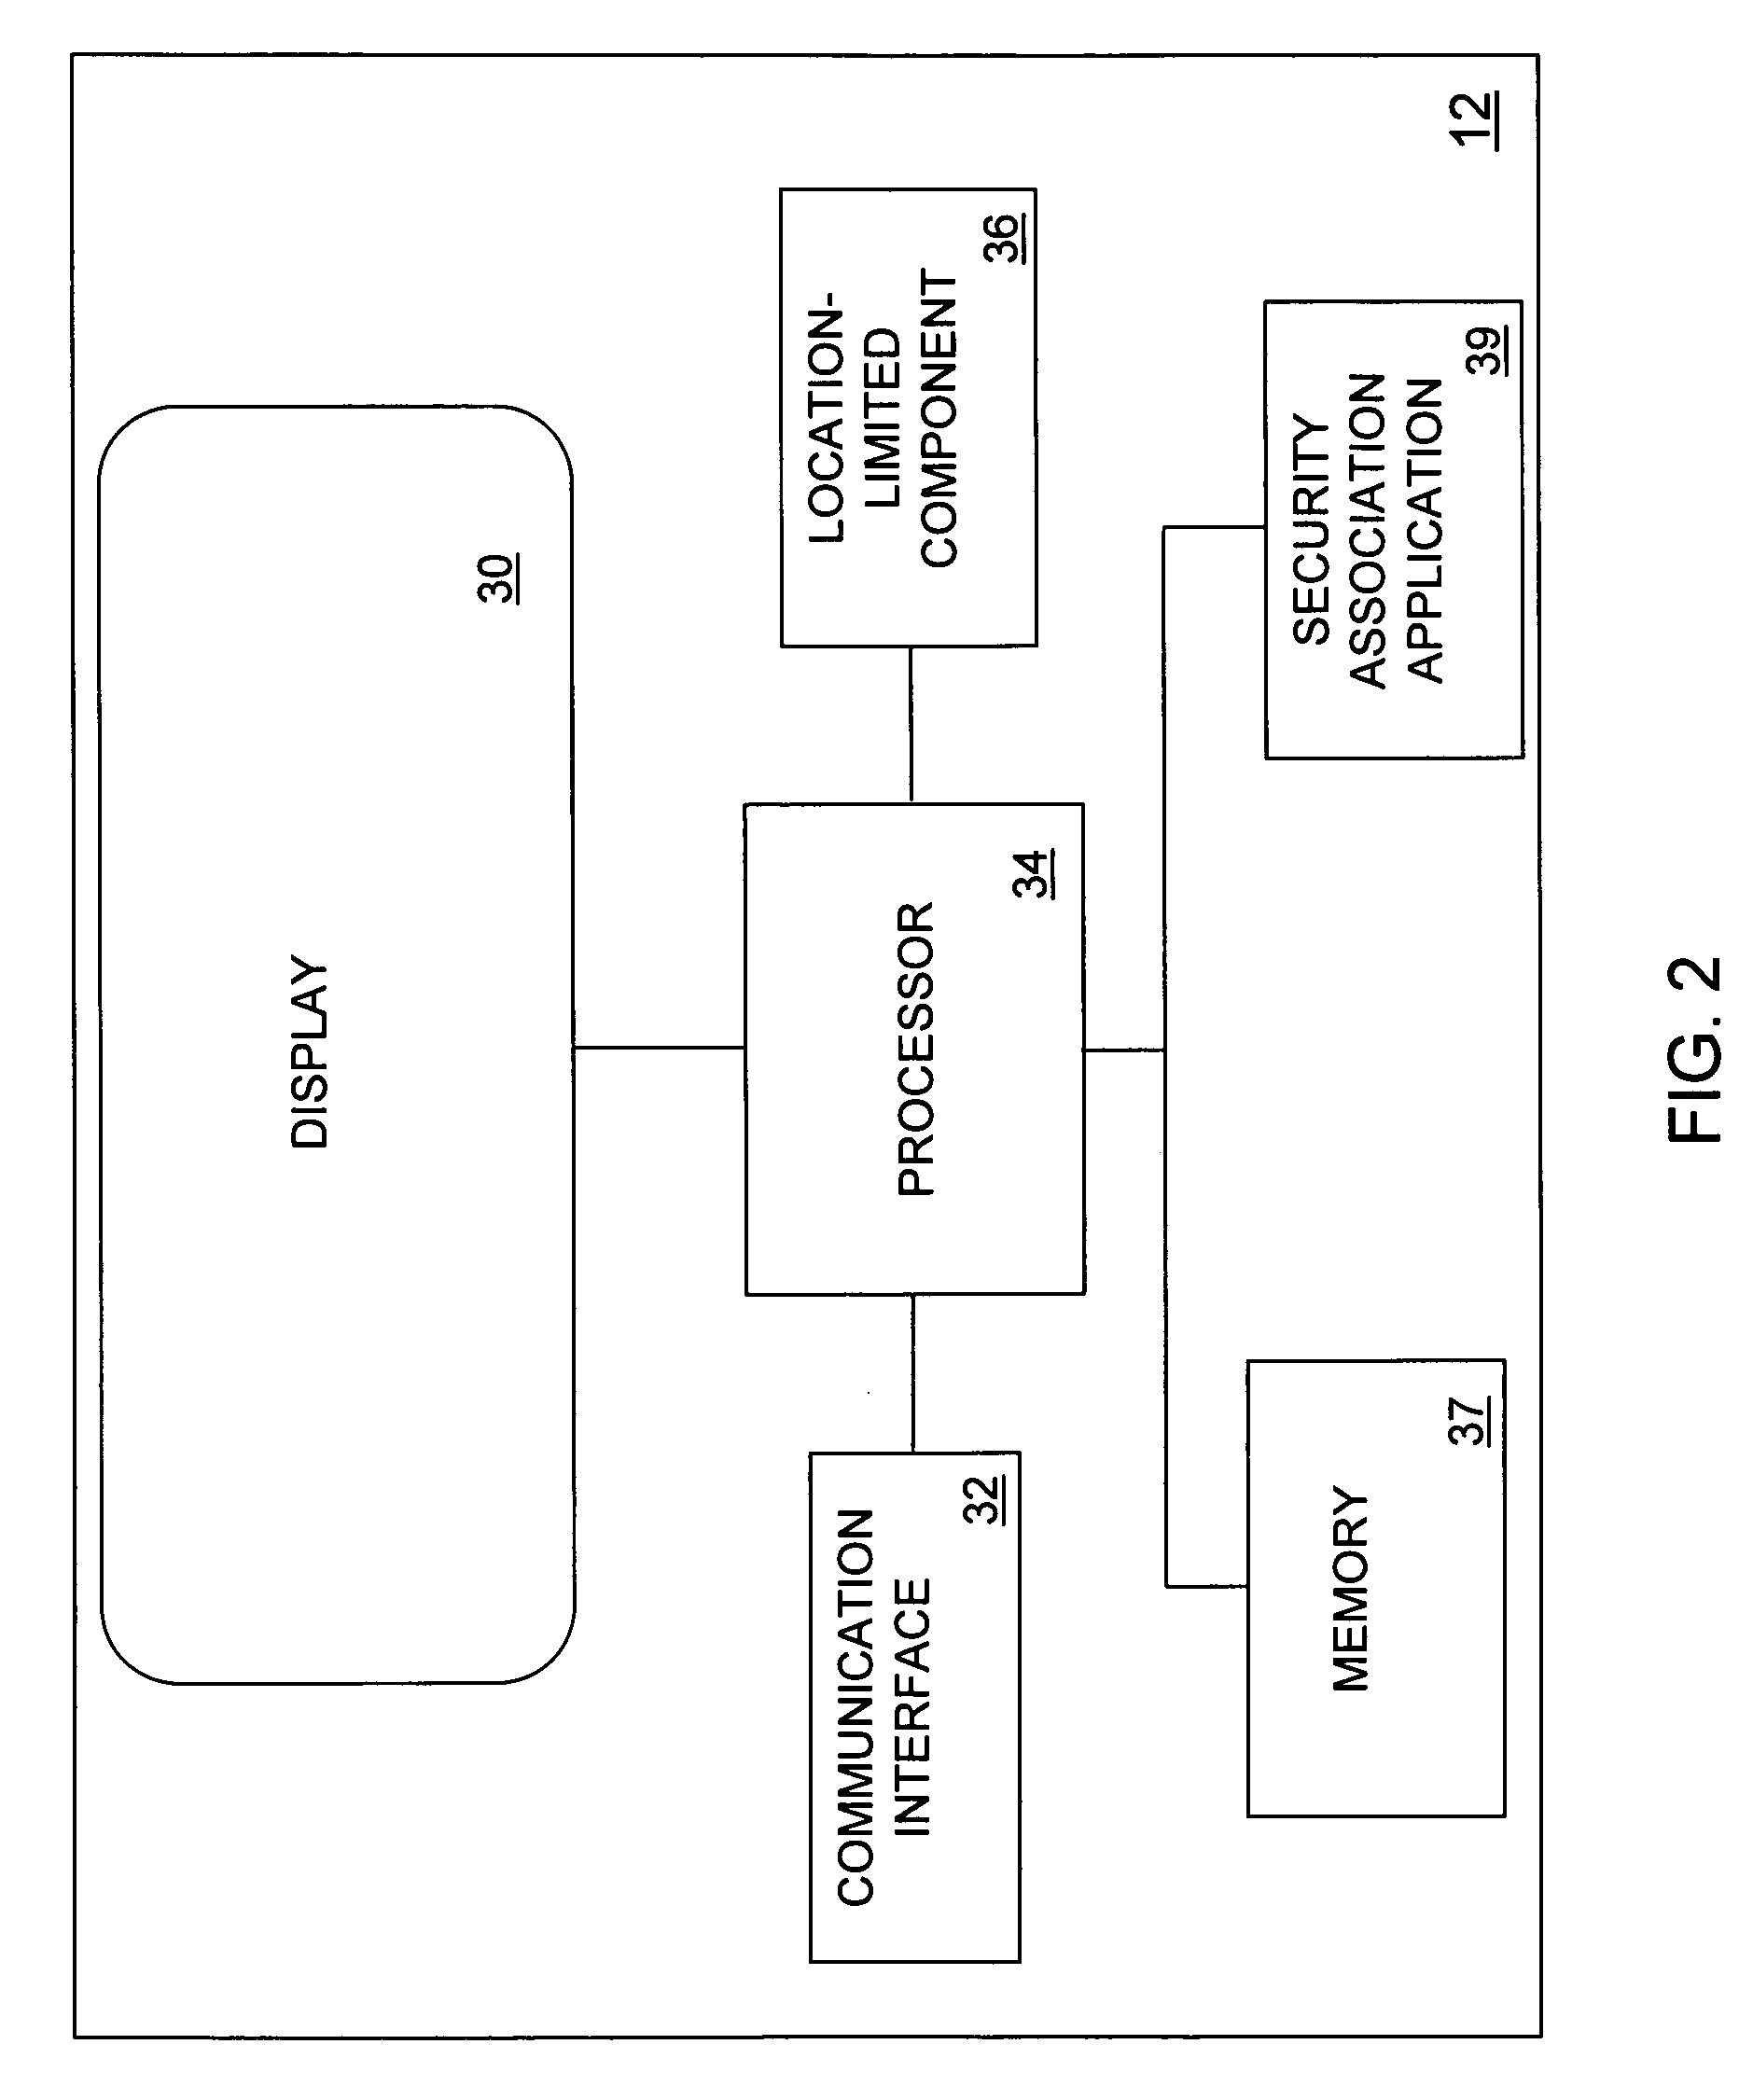 Method for establishing a security association between a wireless access point and a wireless node in a UPnP environment